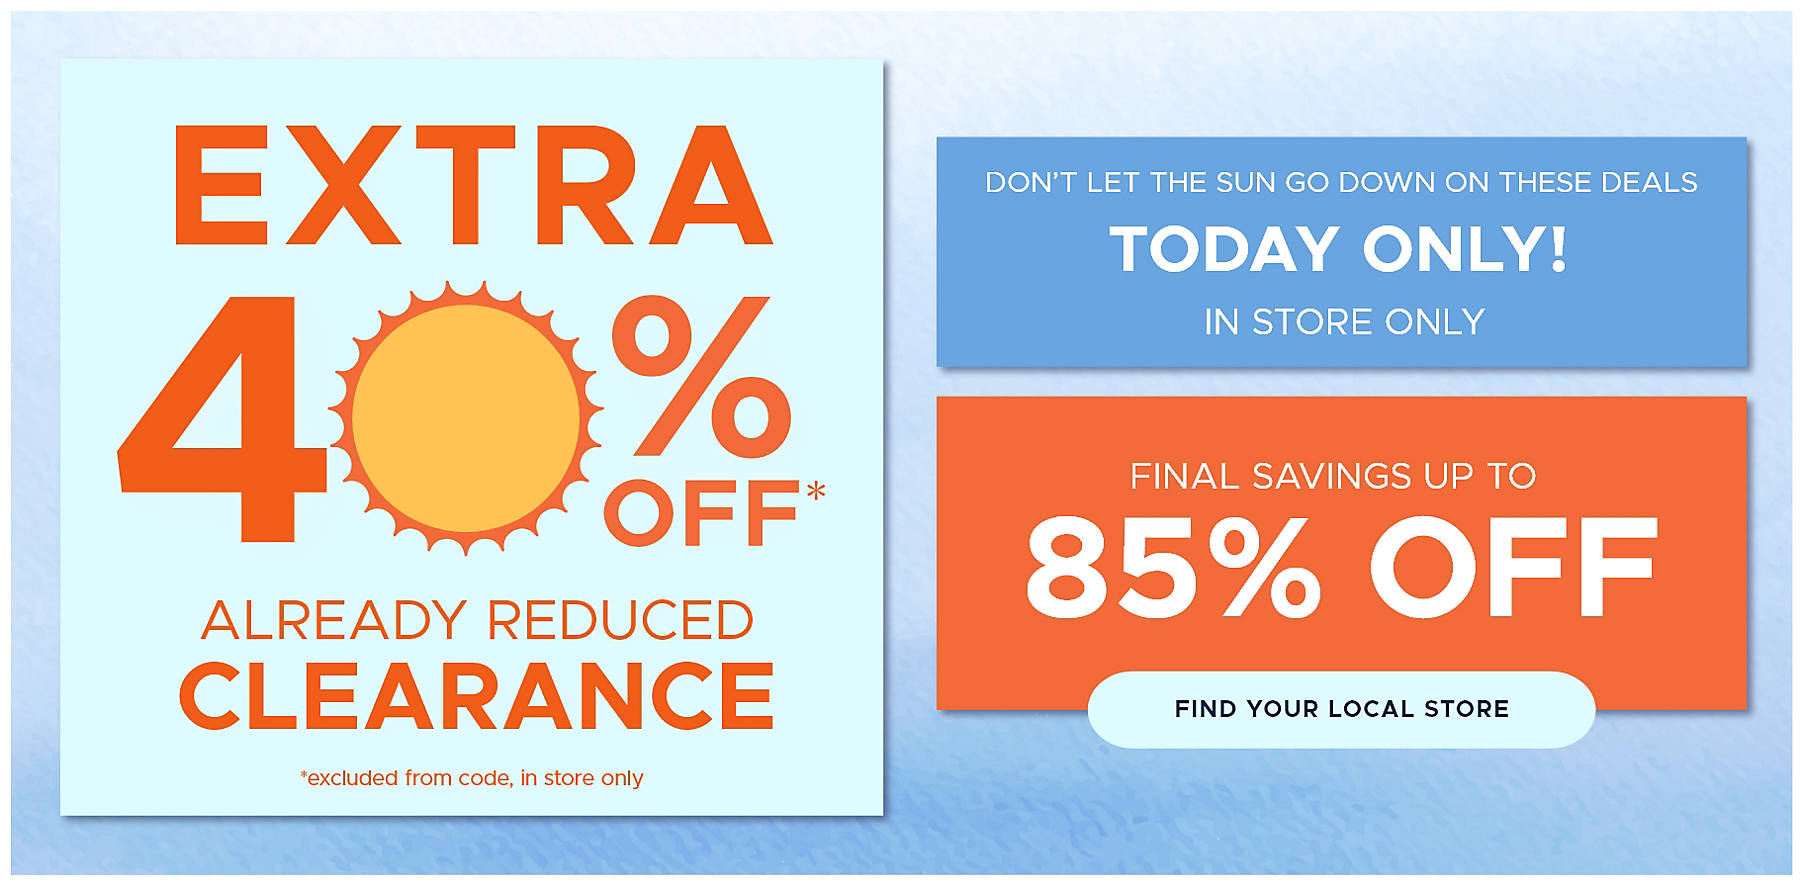 don't let the sun go down on these deals today only! in store only final savings up to 85% off shop all clearance extra 40% off* already reduced clearance *excluded from code, in store only find your local store